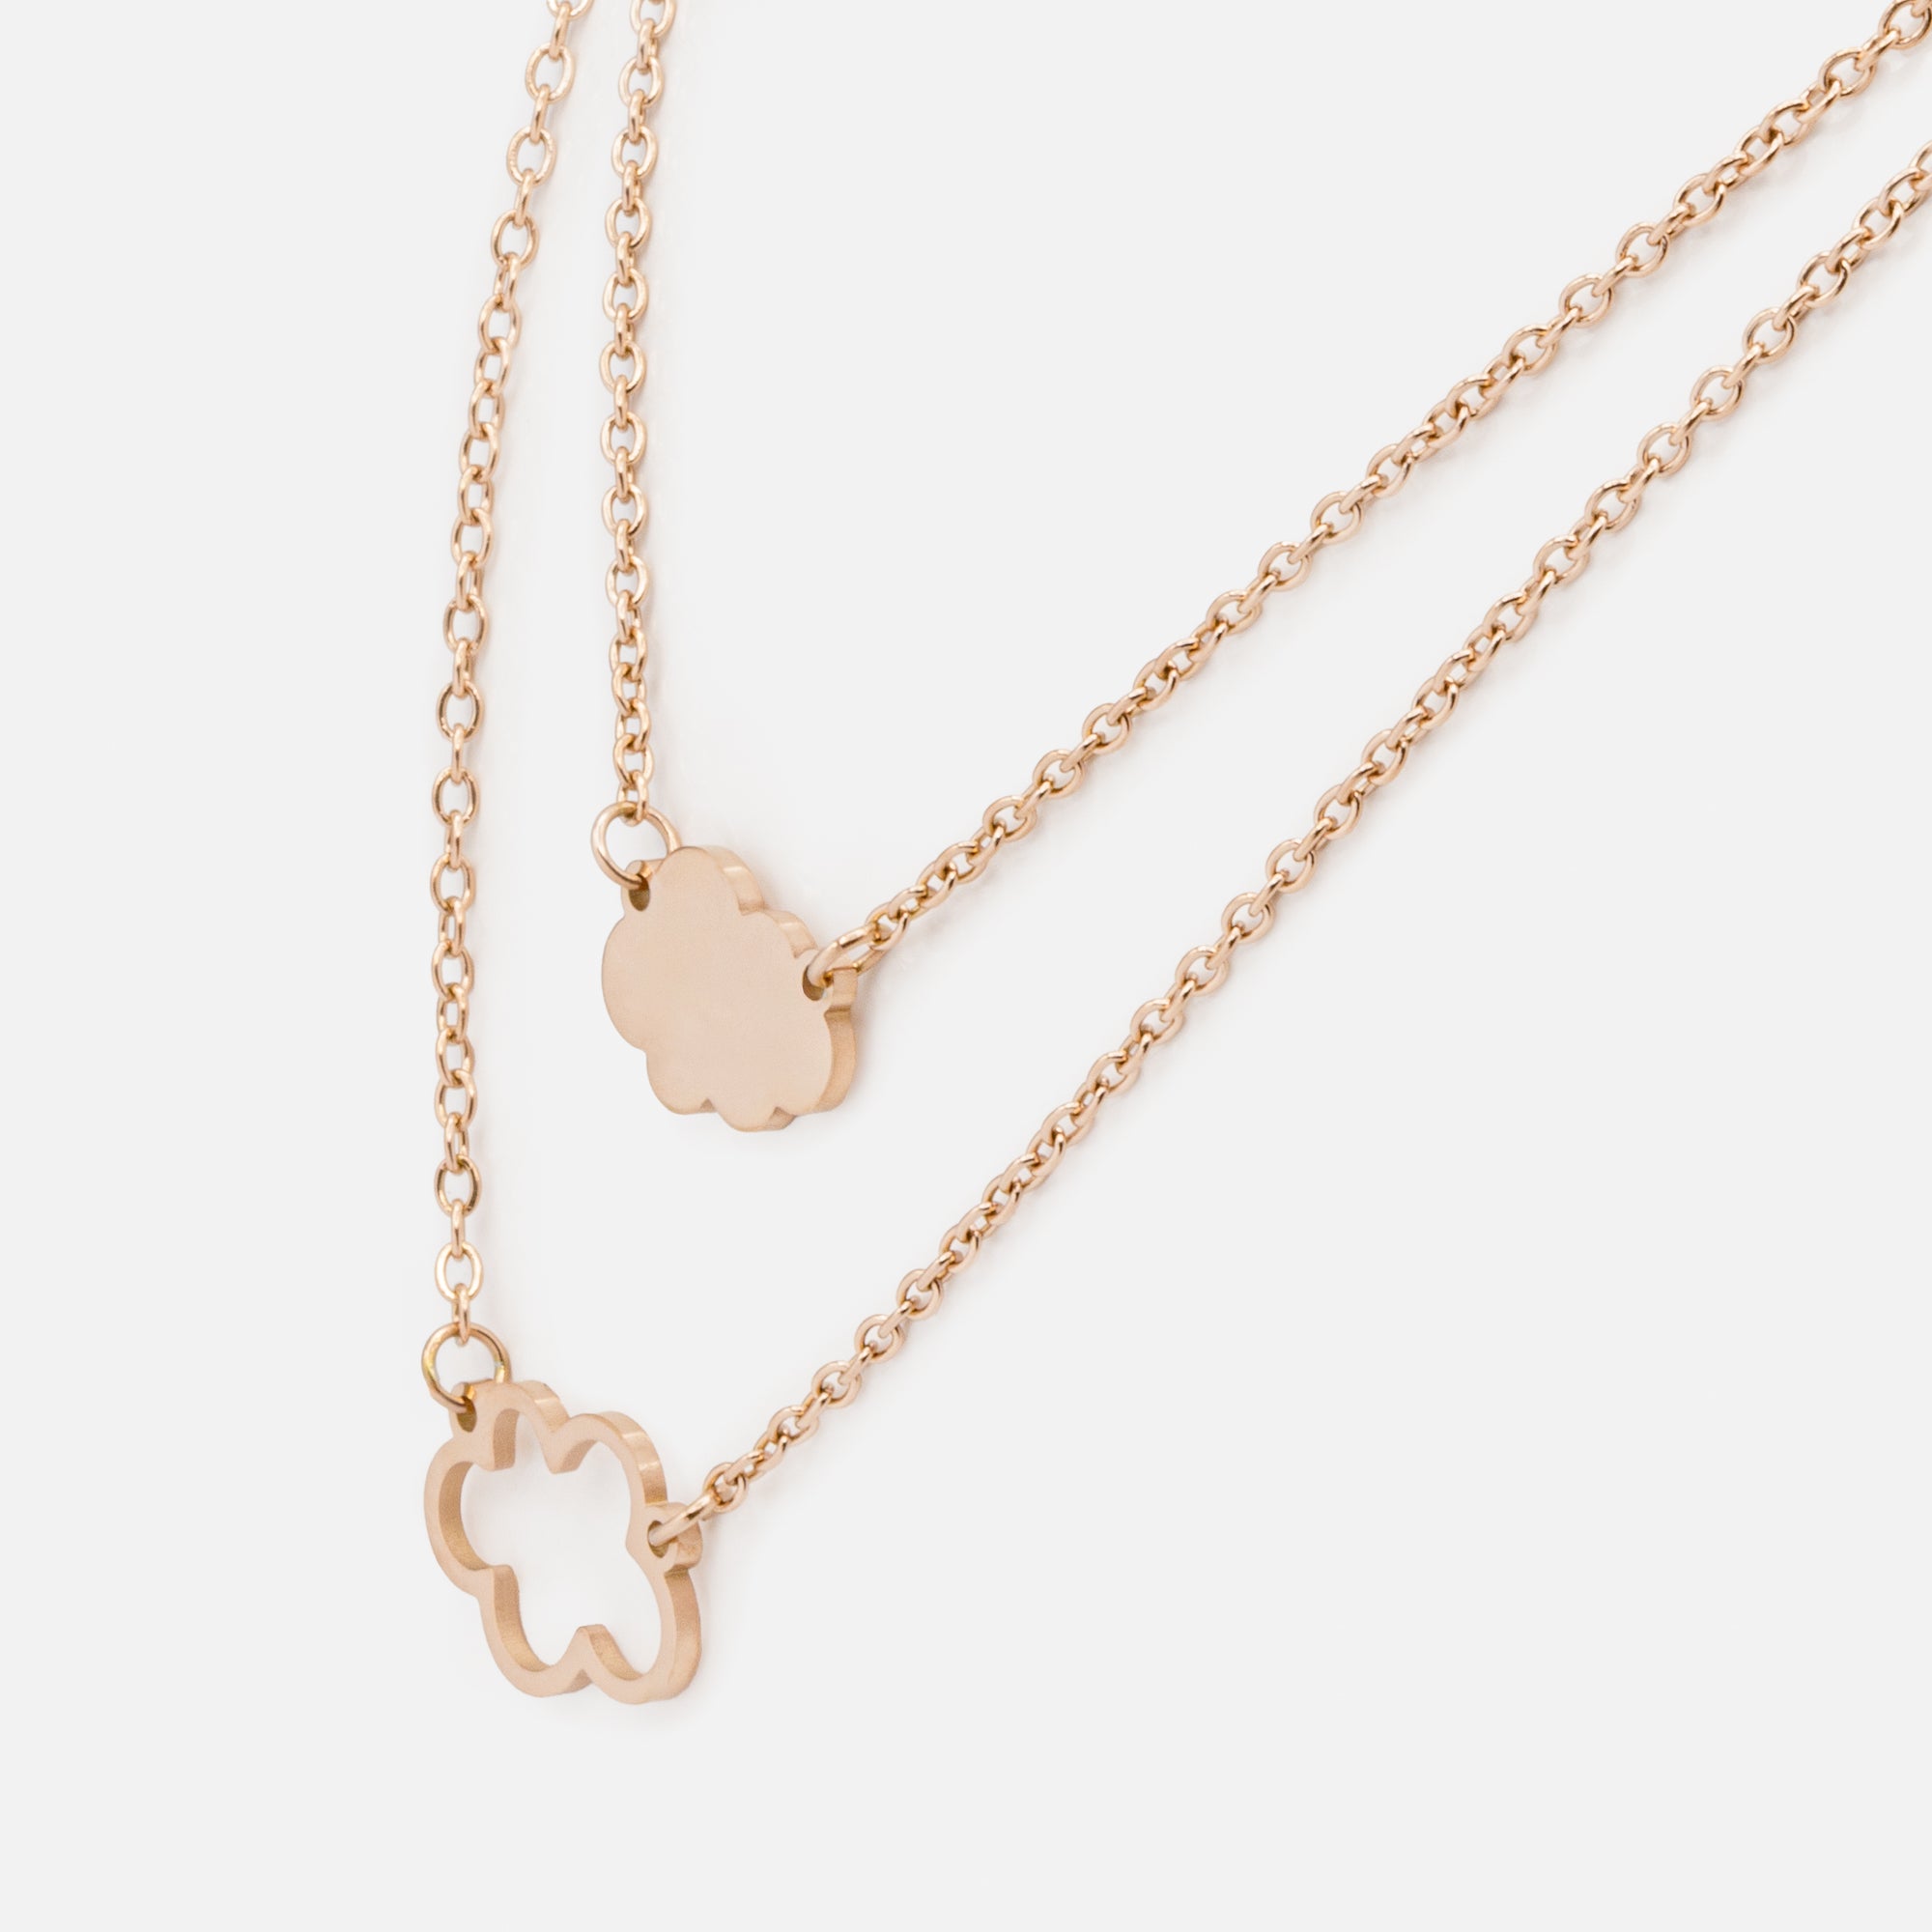 Set of two rose gold Mini & Me cloud necklaces in stainless steel